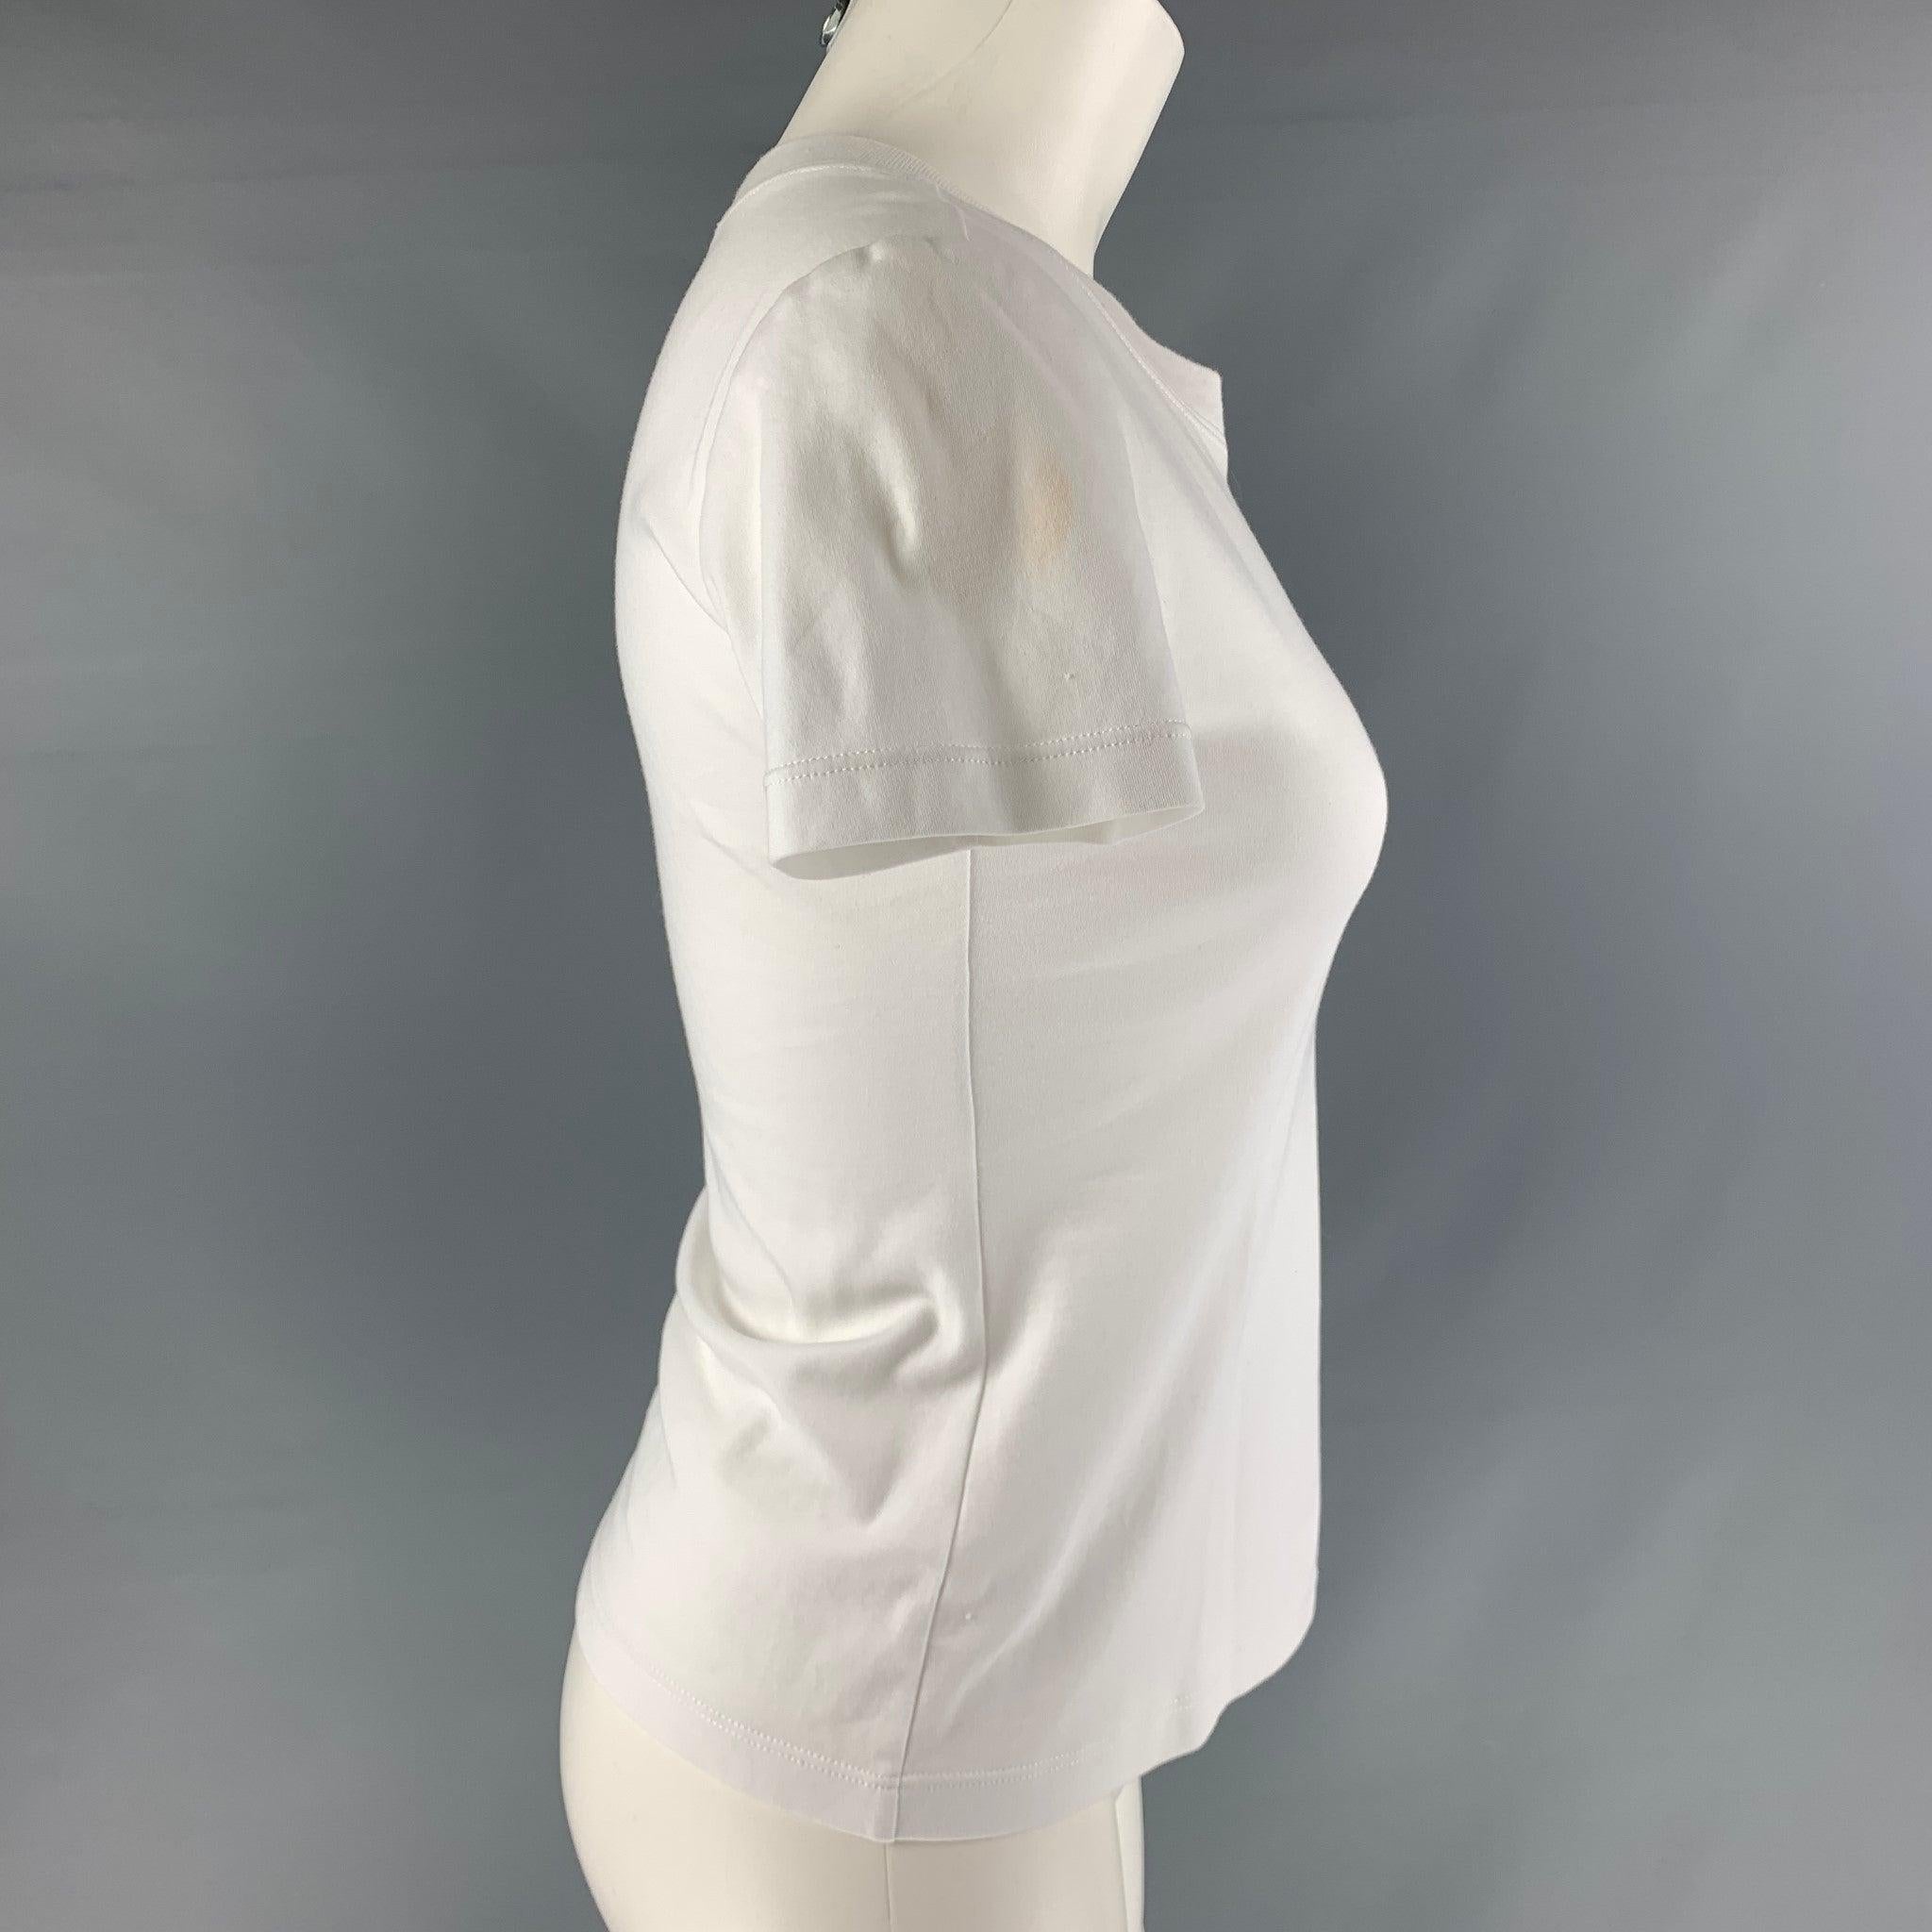 BRANDON MAXWELL T-shirt comes in a white cotton and logo embroidered. Made in NY.Very Good Pre-Owned Condition. Minor signs of being worn. 

Marked:   S 

Measurements: 
 
Shoulder: 16 inches Bust: 34 inches Sleeve: 6 inches Length: 20.5 inches 

 